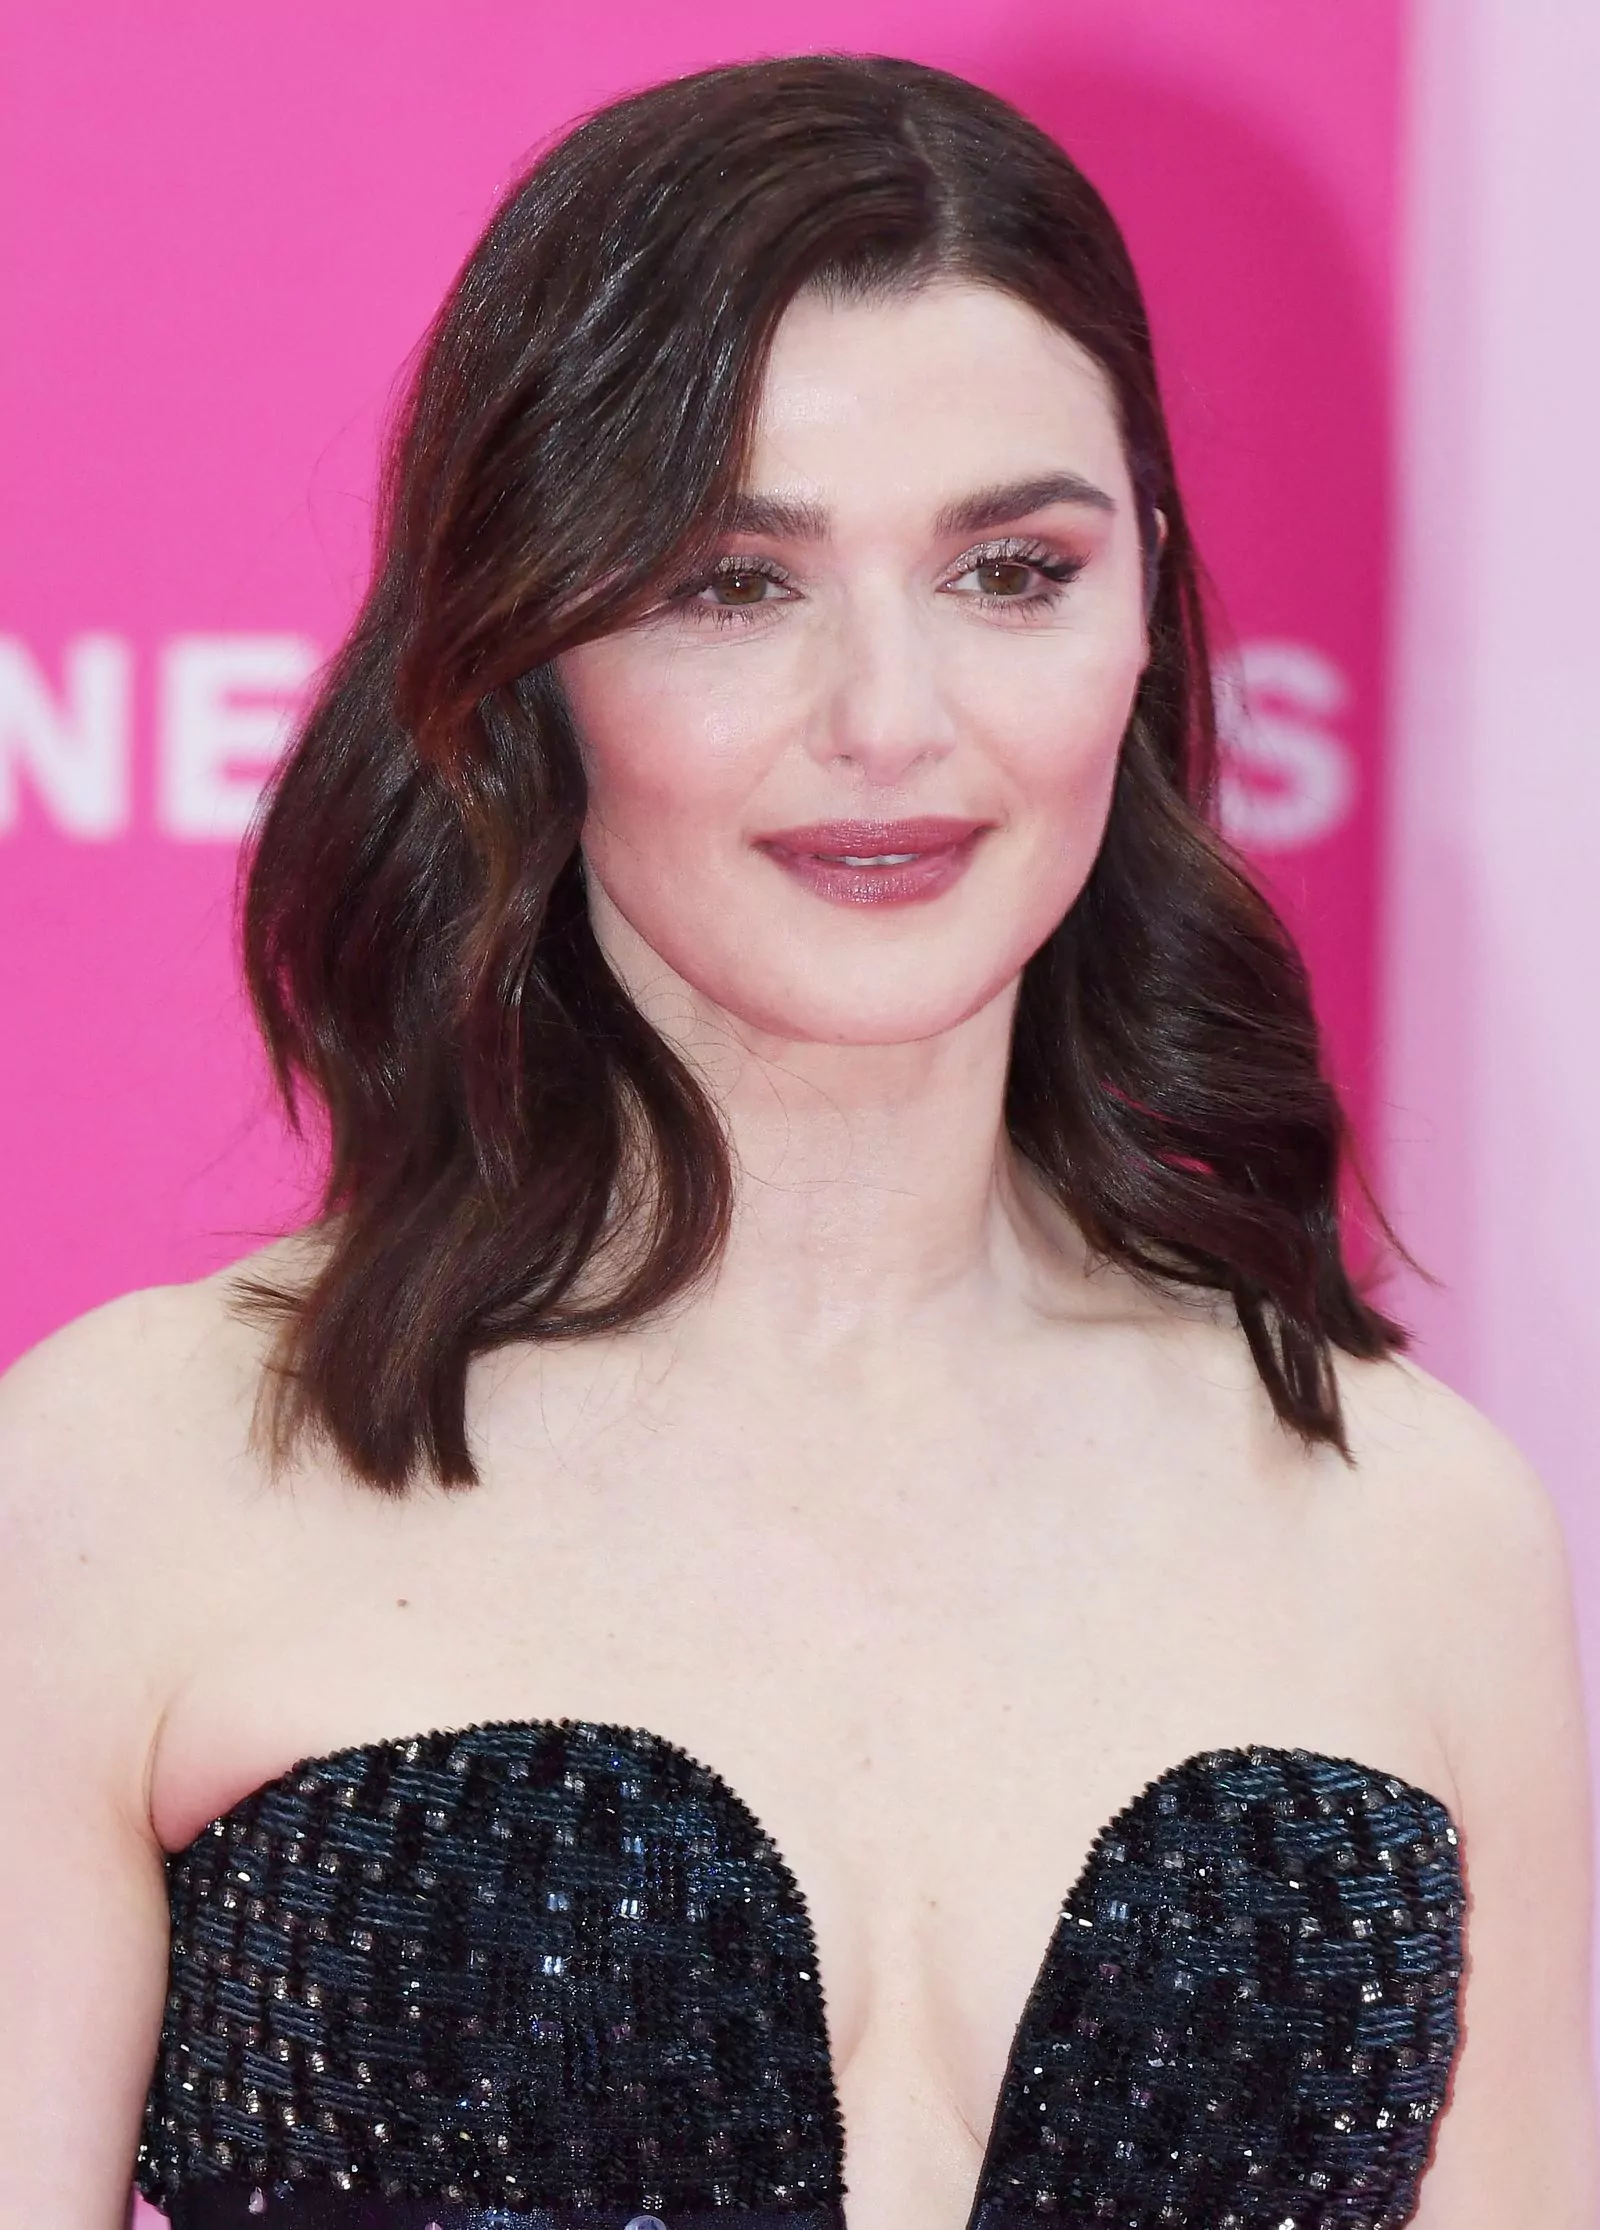 Rachel Weisz at the 6th International Festival of TV Series Canneseries 2023 in Cannes, April 14, 2023, photo 2